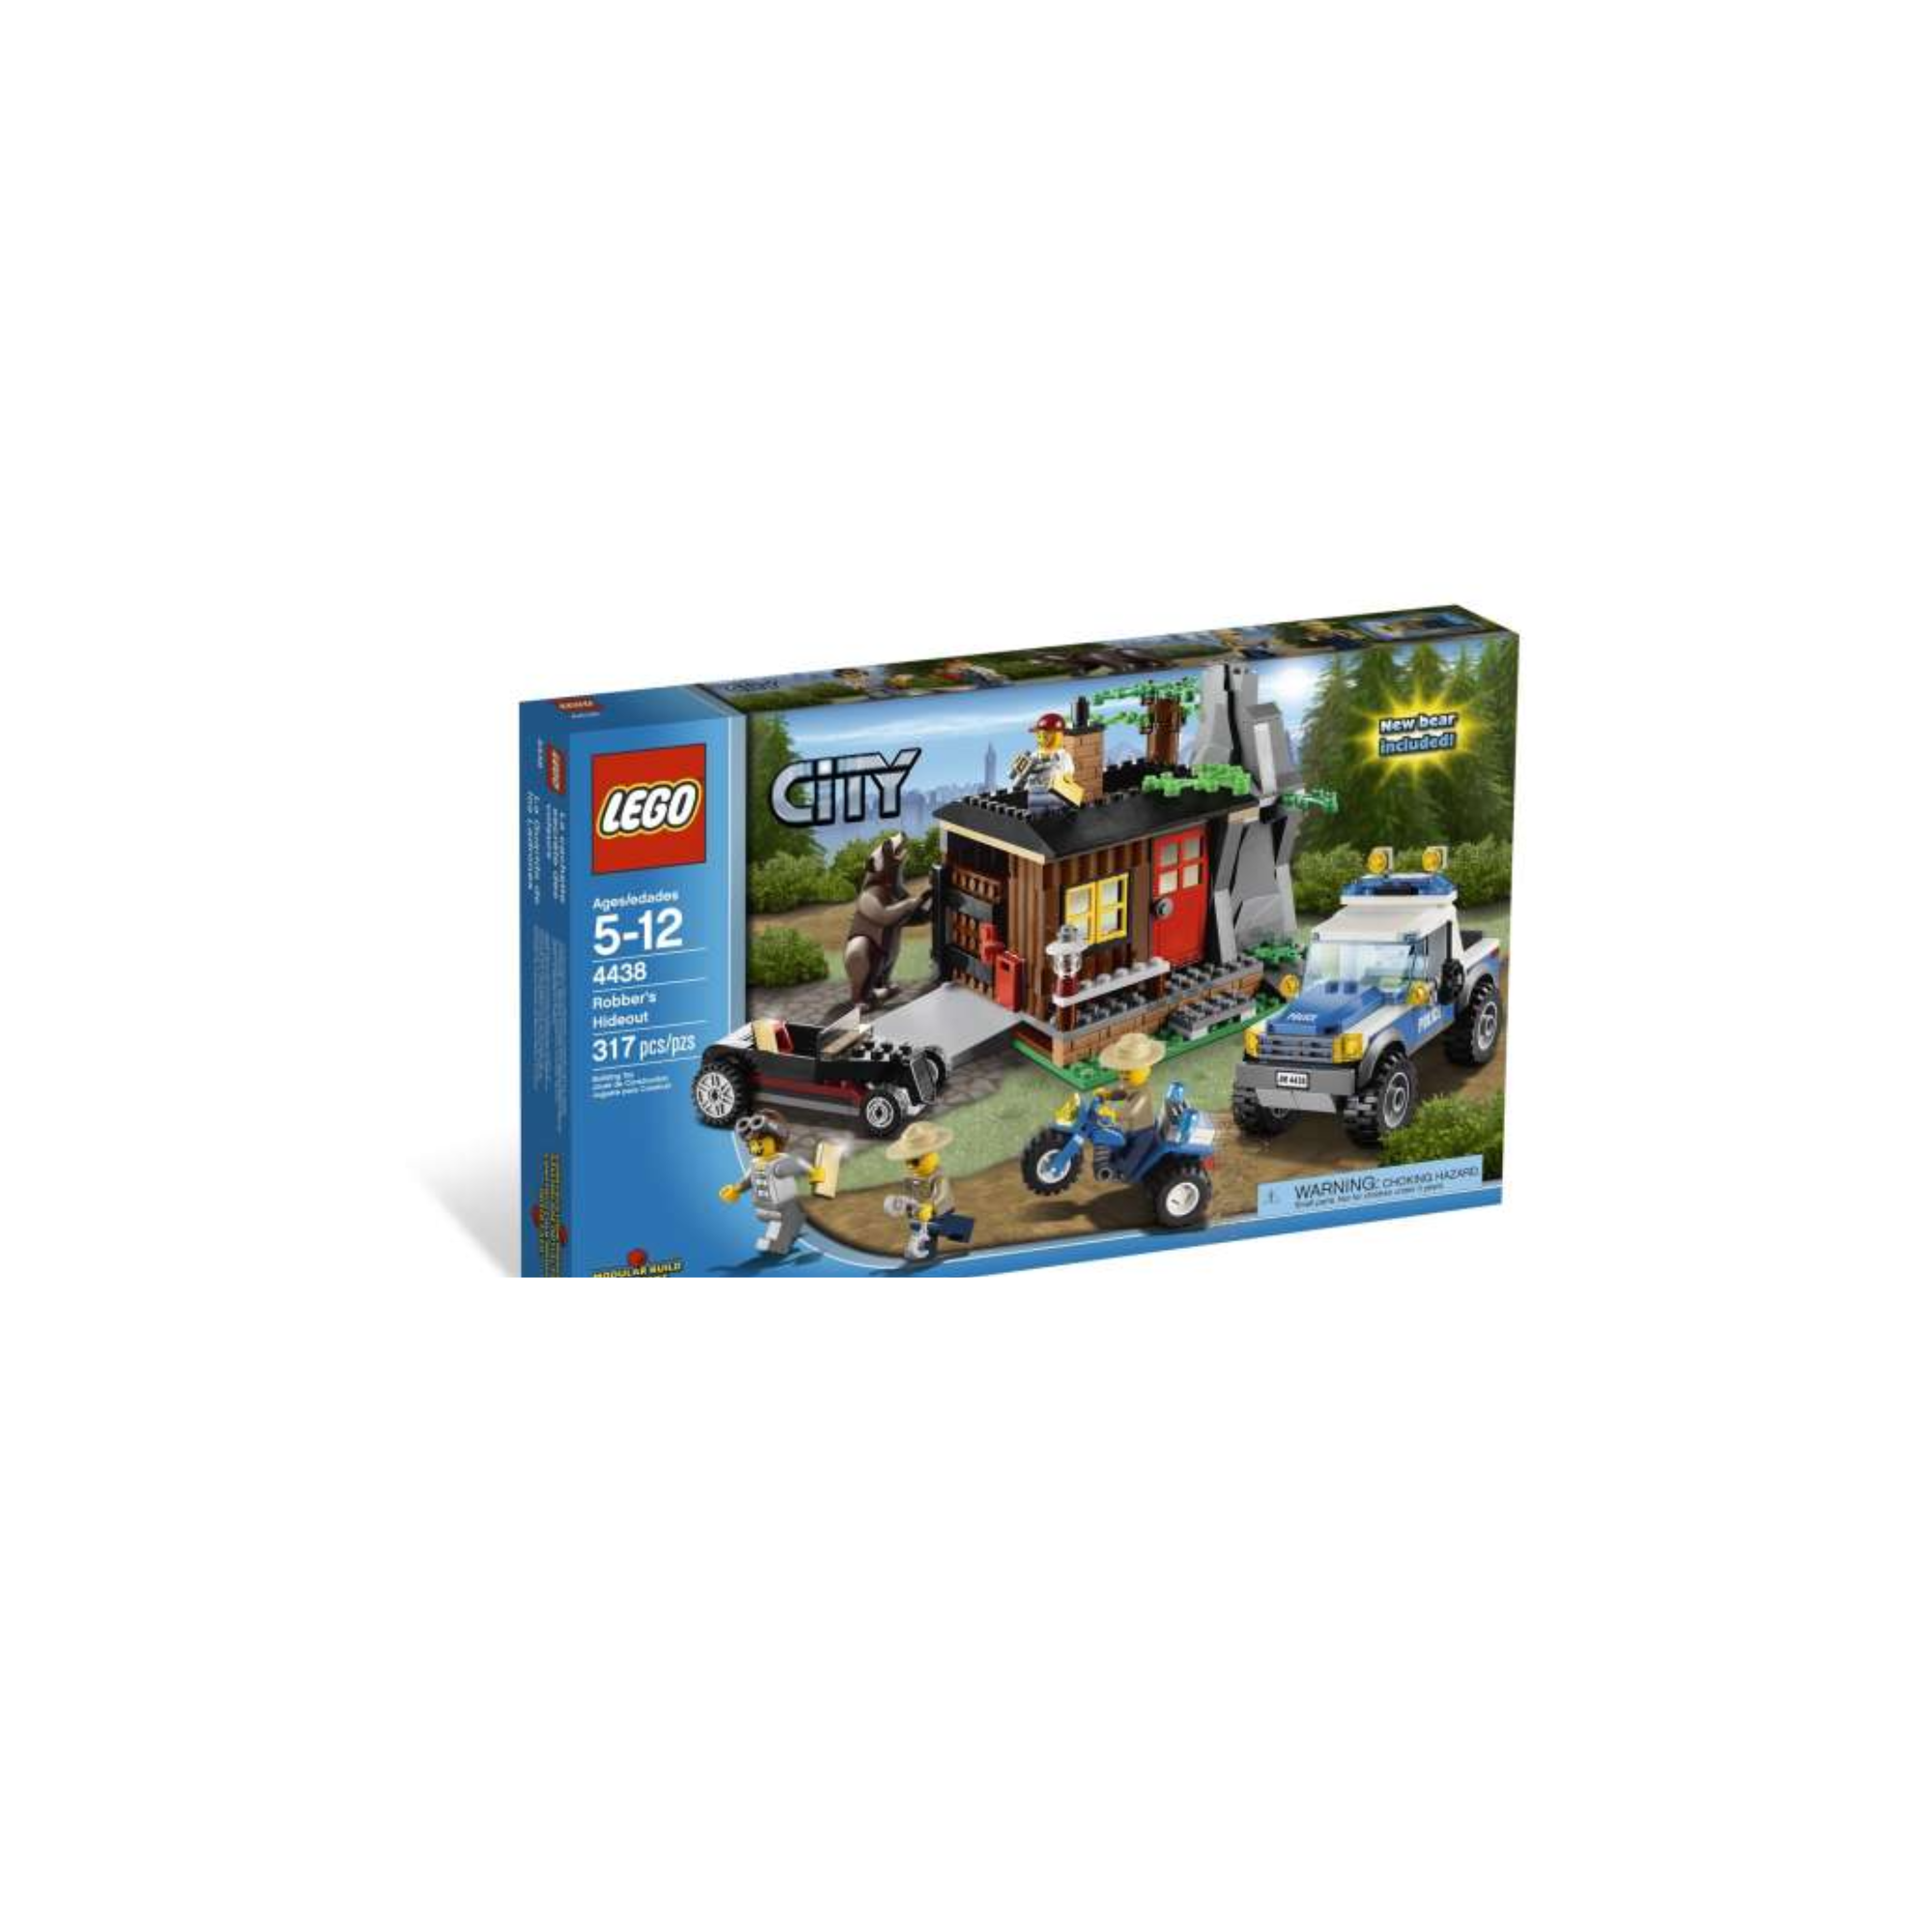 Lego City Robber's Hideout